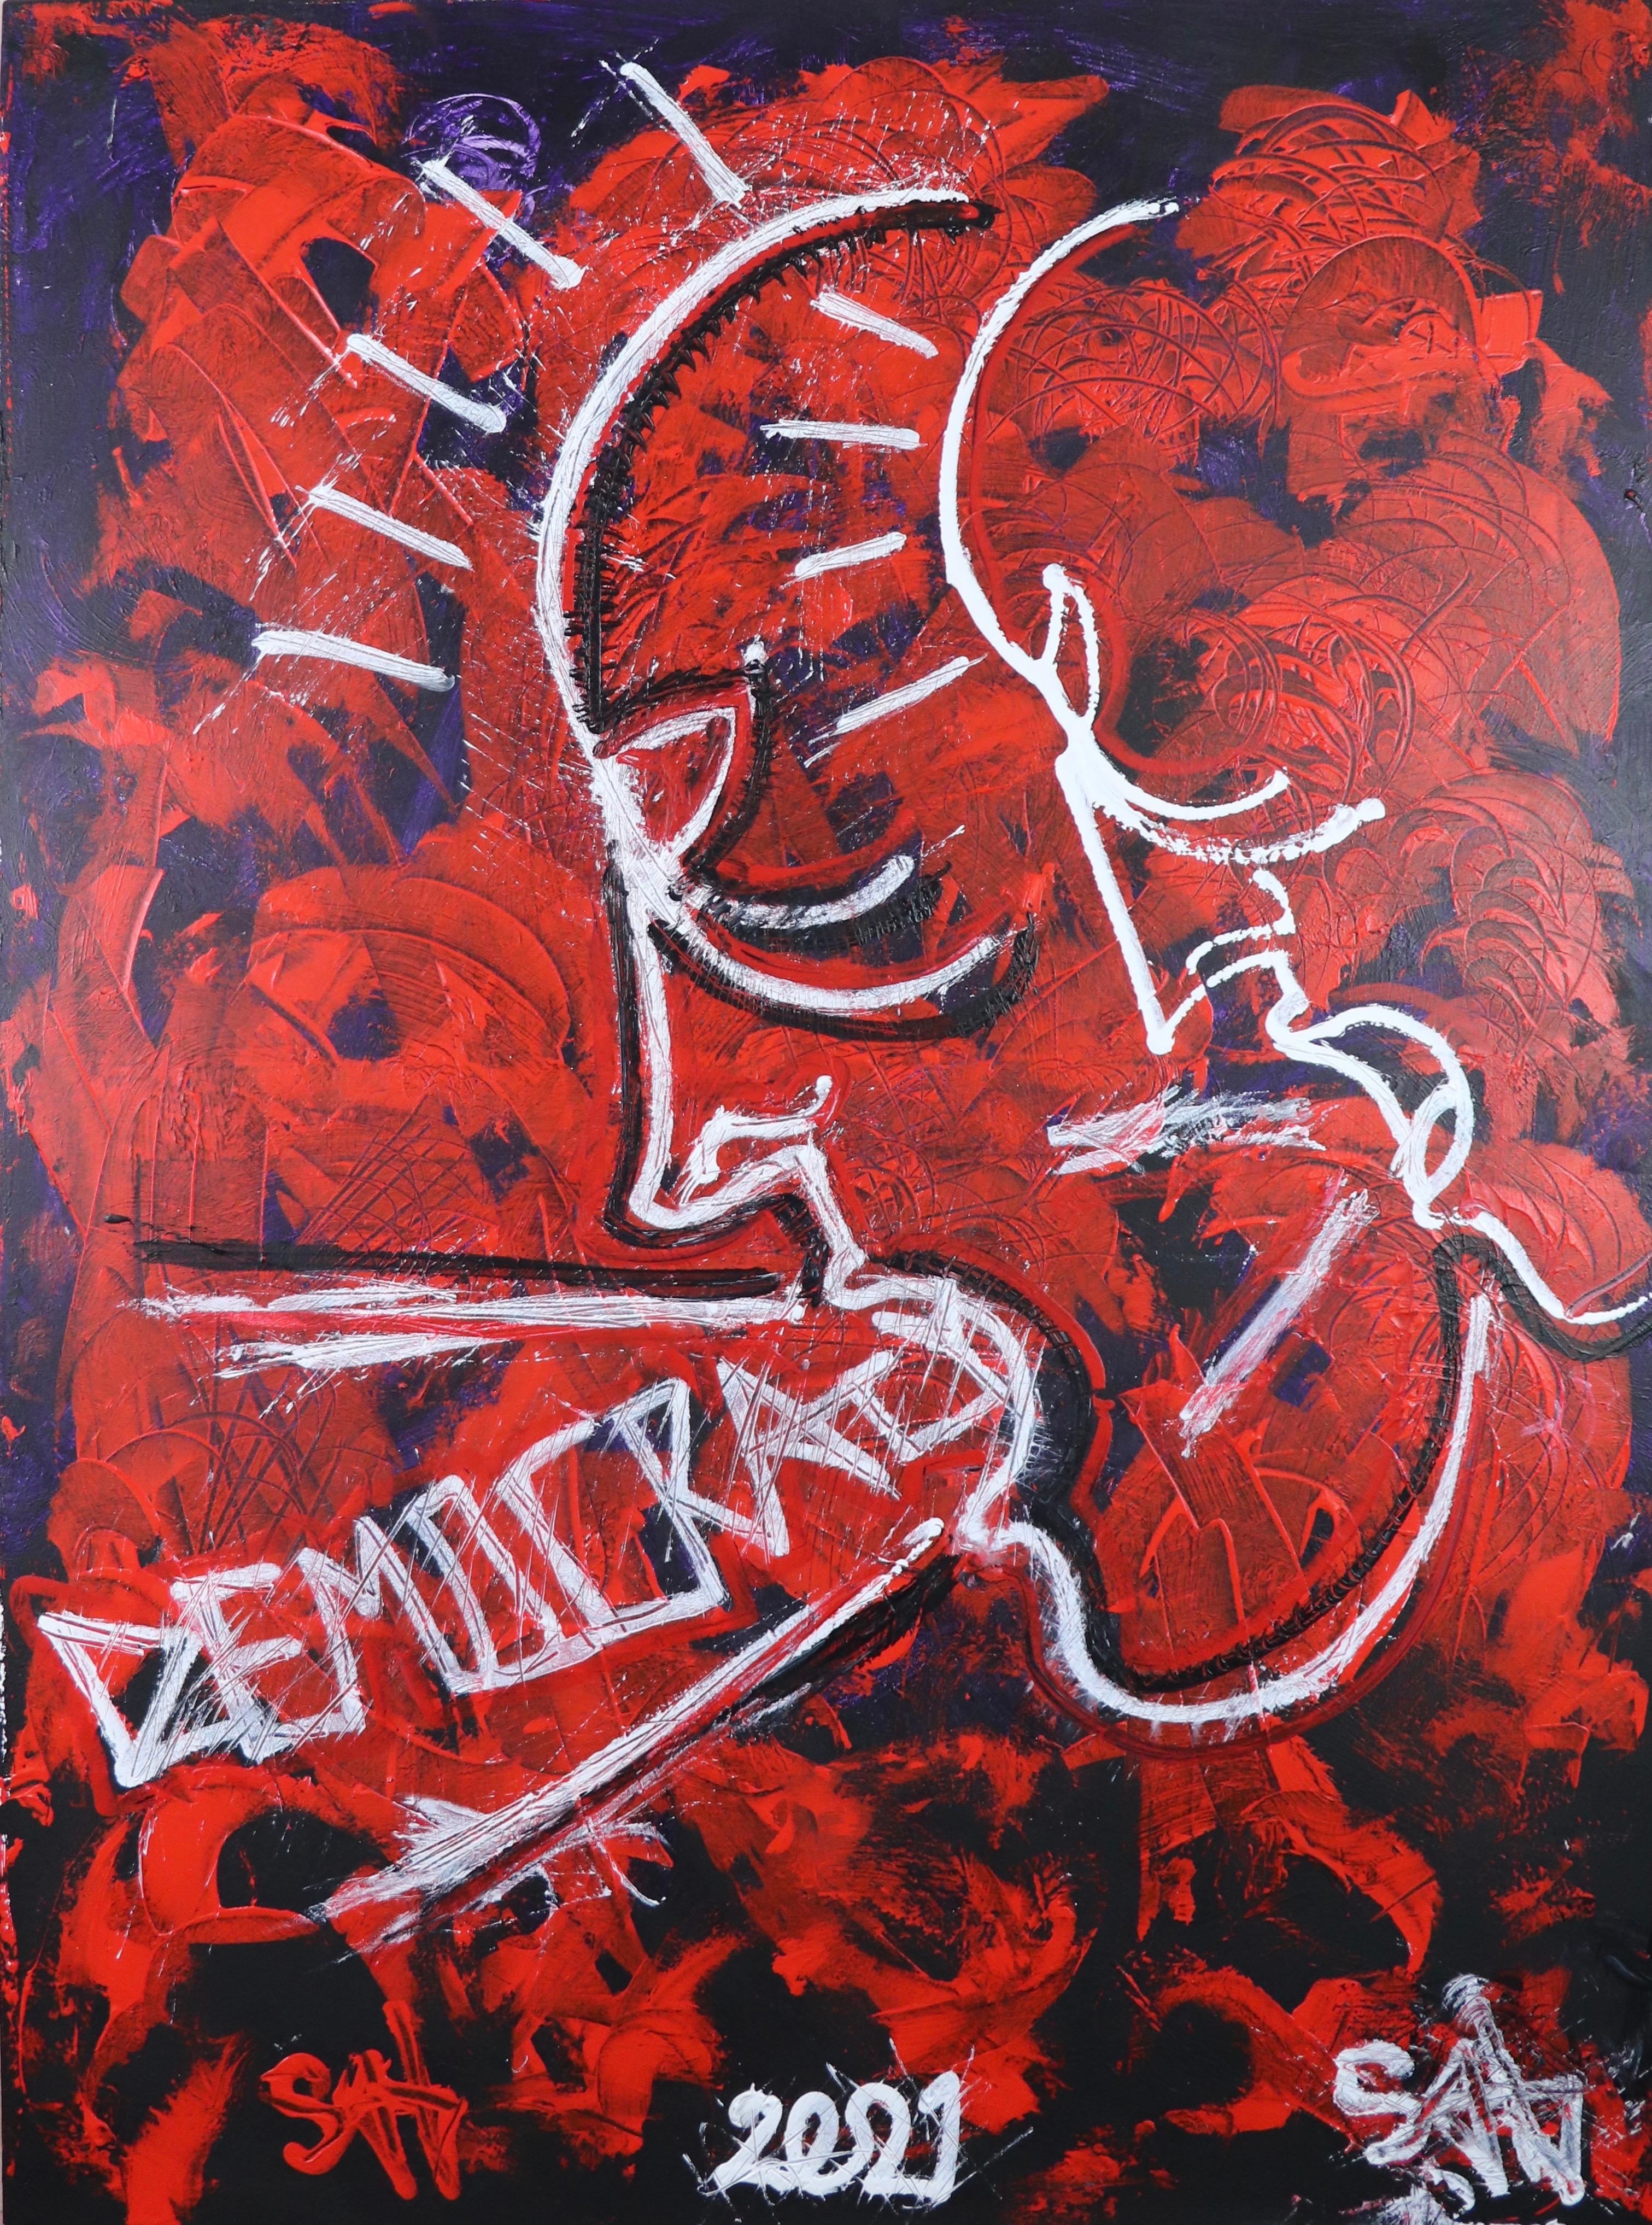 Sax Berlin Abstract Painting - Democracy (All over the World ). Contemporary Neo Expressionist Oil Painting